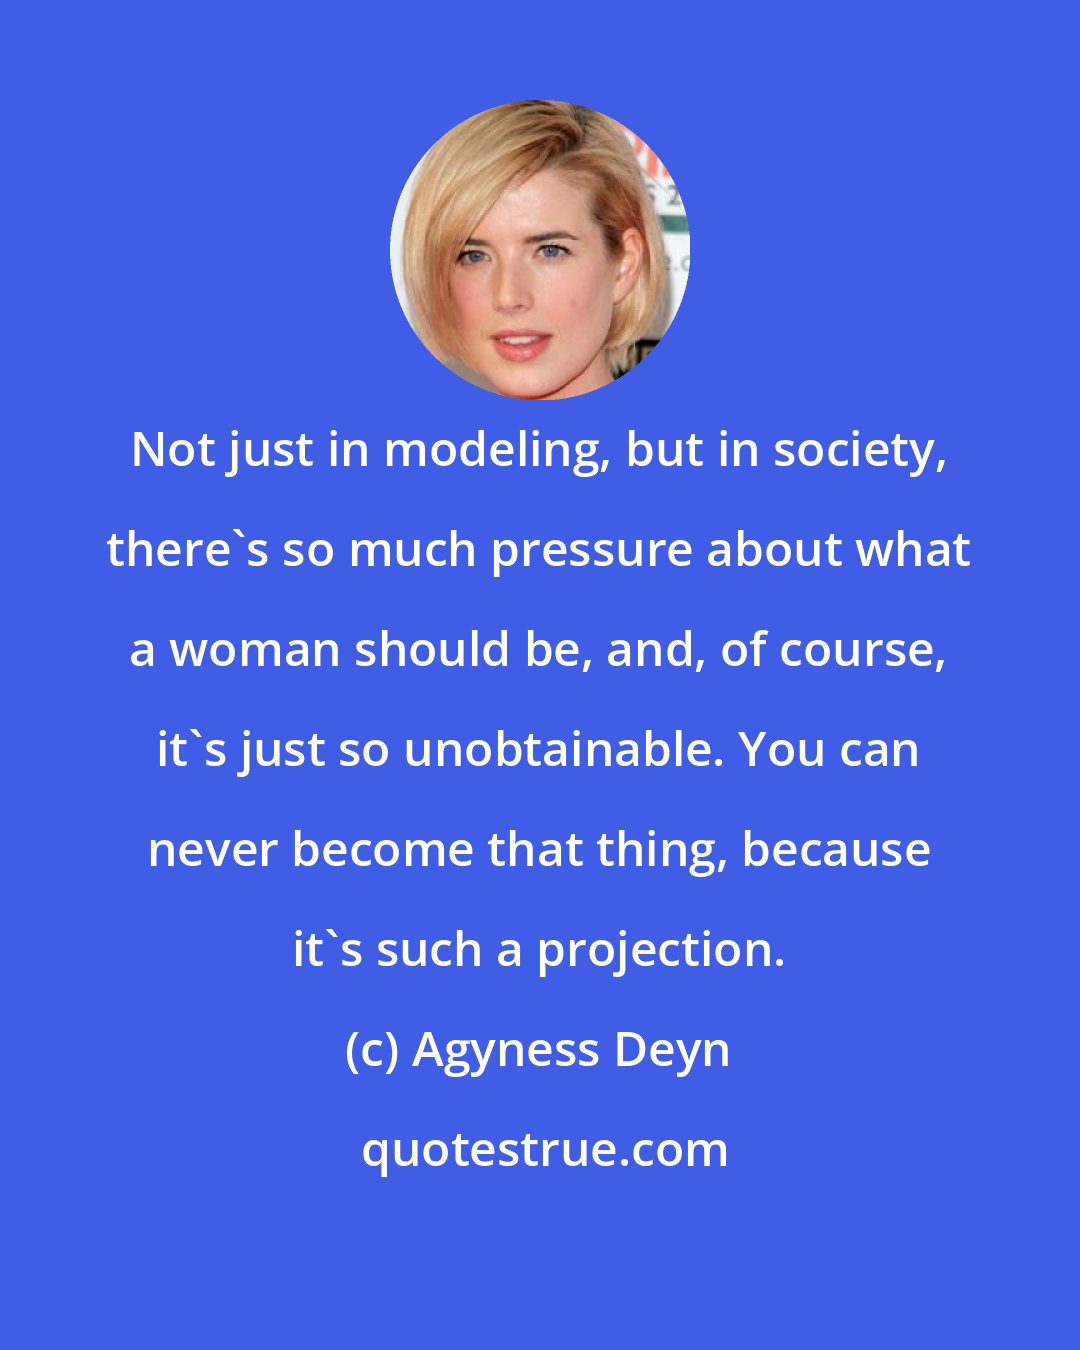 Agyness Deyn: Not just in modeling, but in society, there's so much pressure about what a woman should be, and, of course, it's just so unobtainable. You can never become that thing, because it's such a projection.